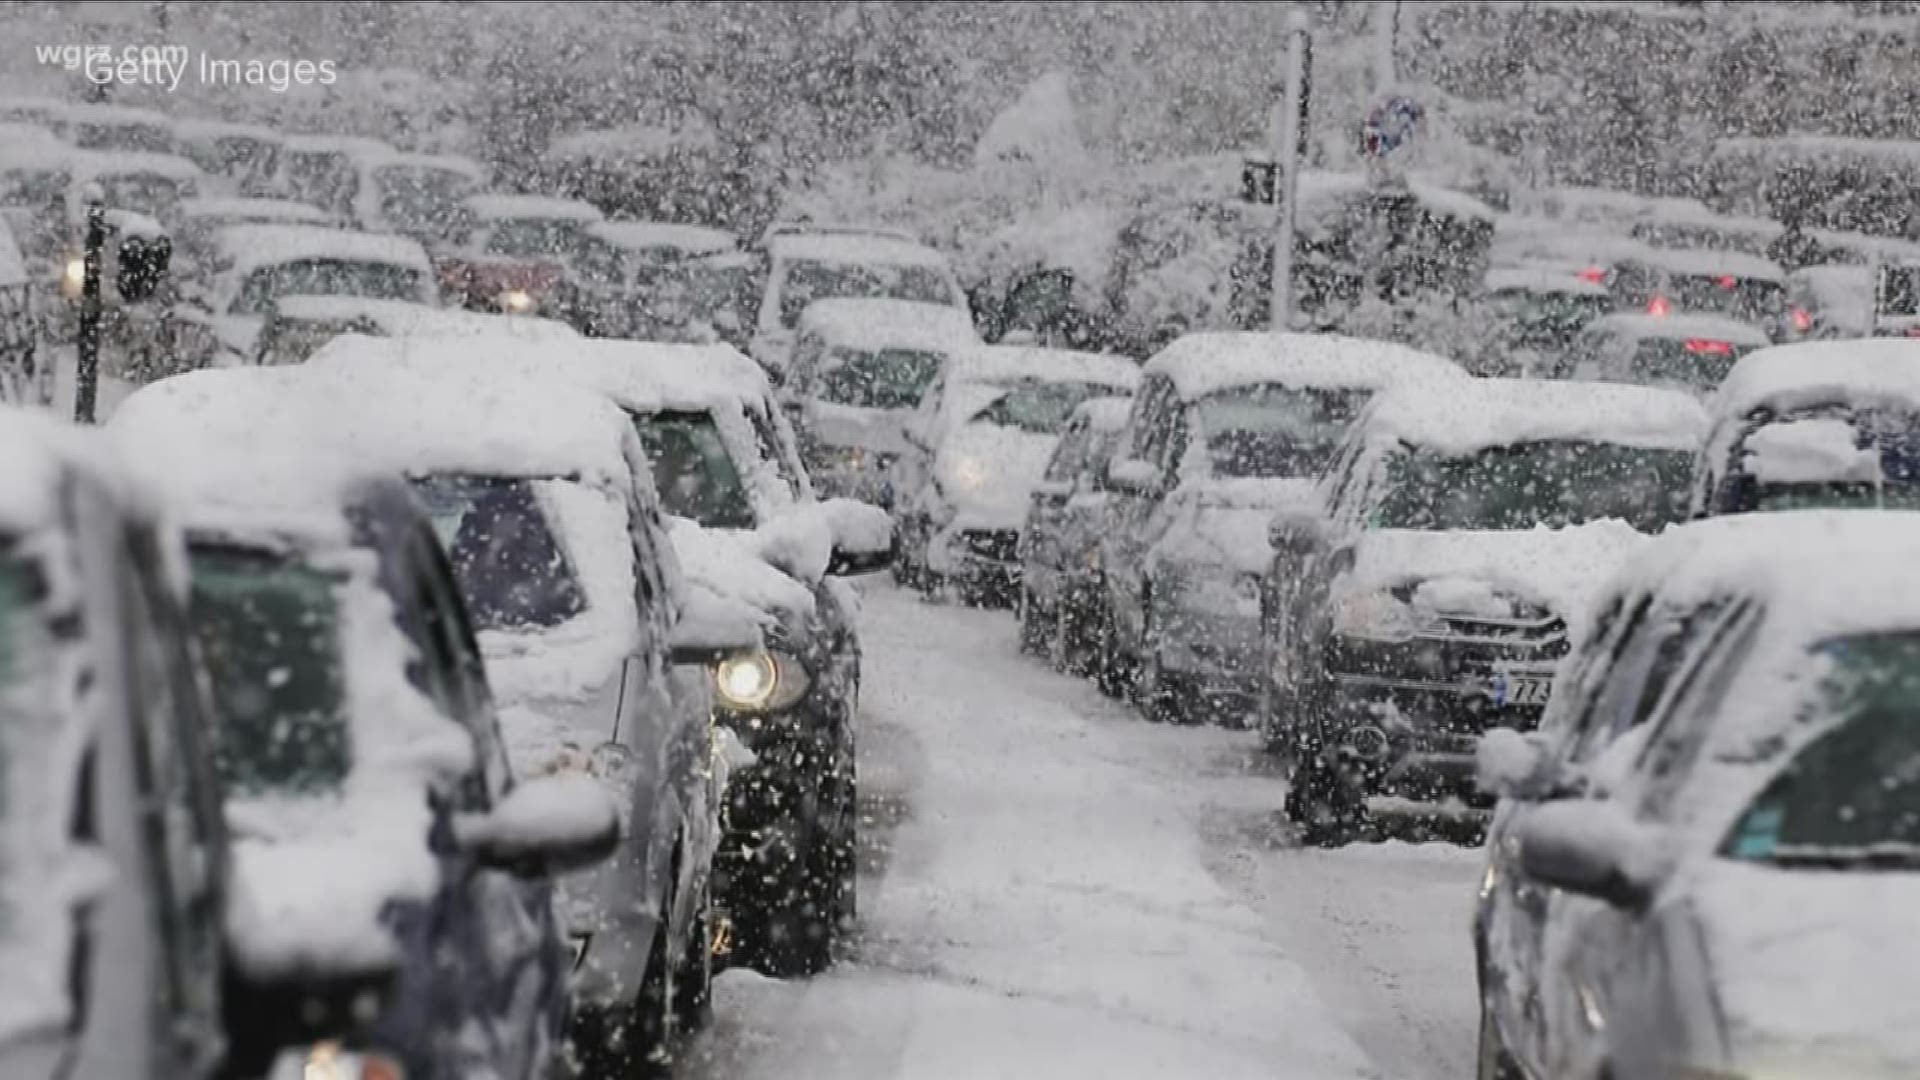 It's snowy days like today which makes the simplest tasks like driving to work a bit more challenging. And there are some rules you might not know about